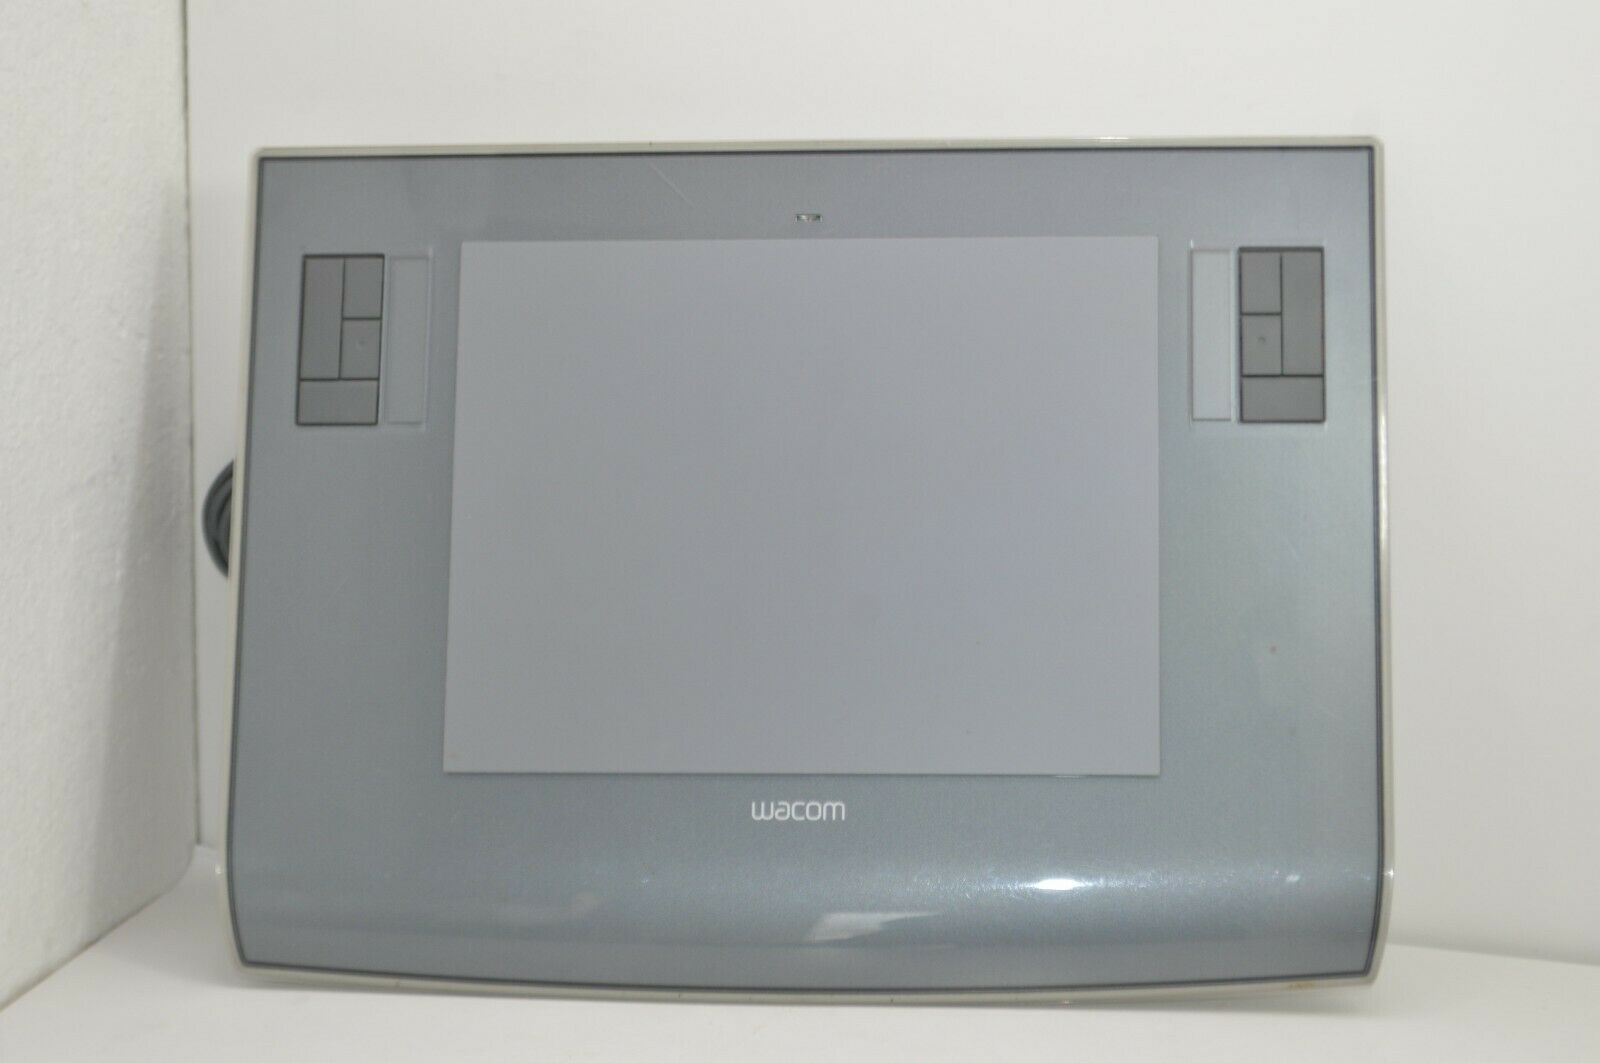 Wacom Intuos 3 PTZ-630 6x8" USB Graphics Drawing Tablet only NO PEN